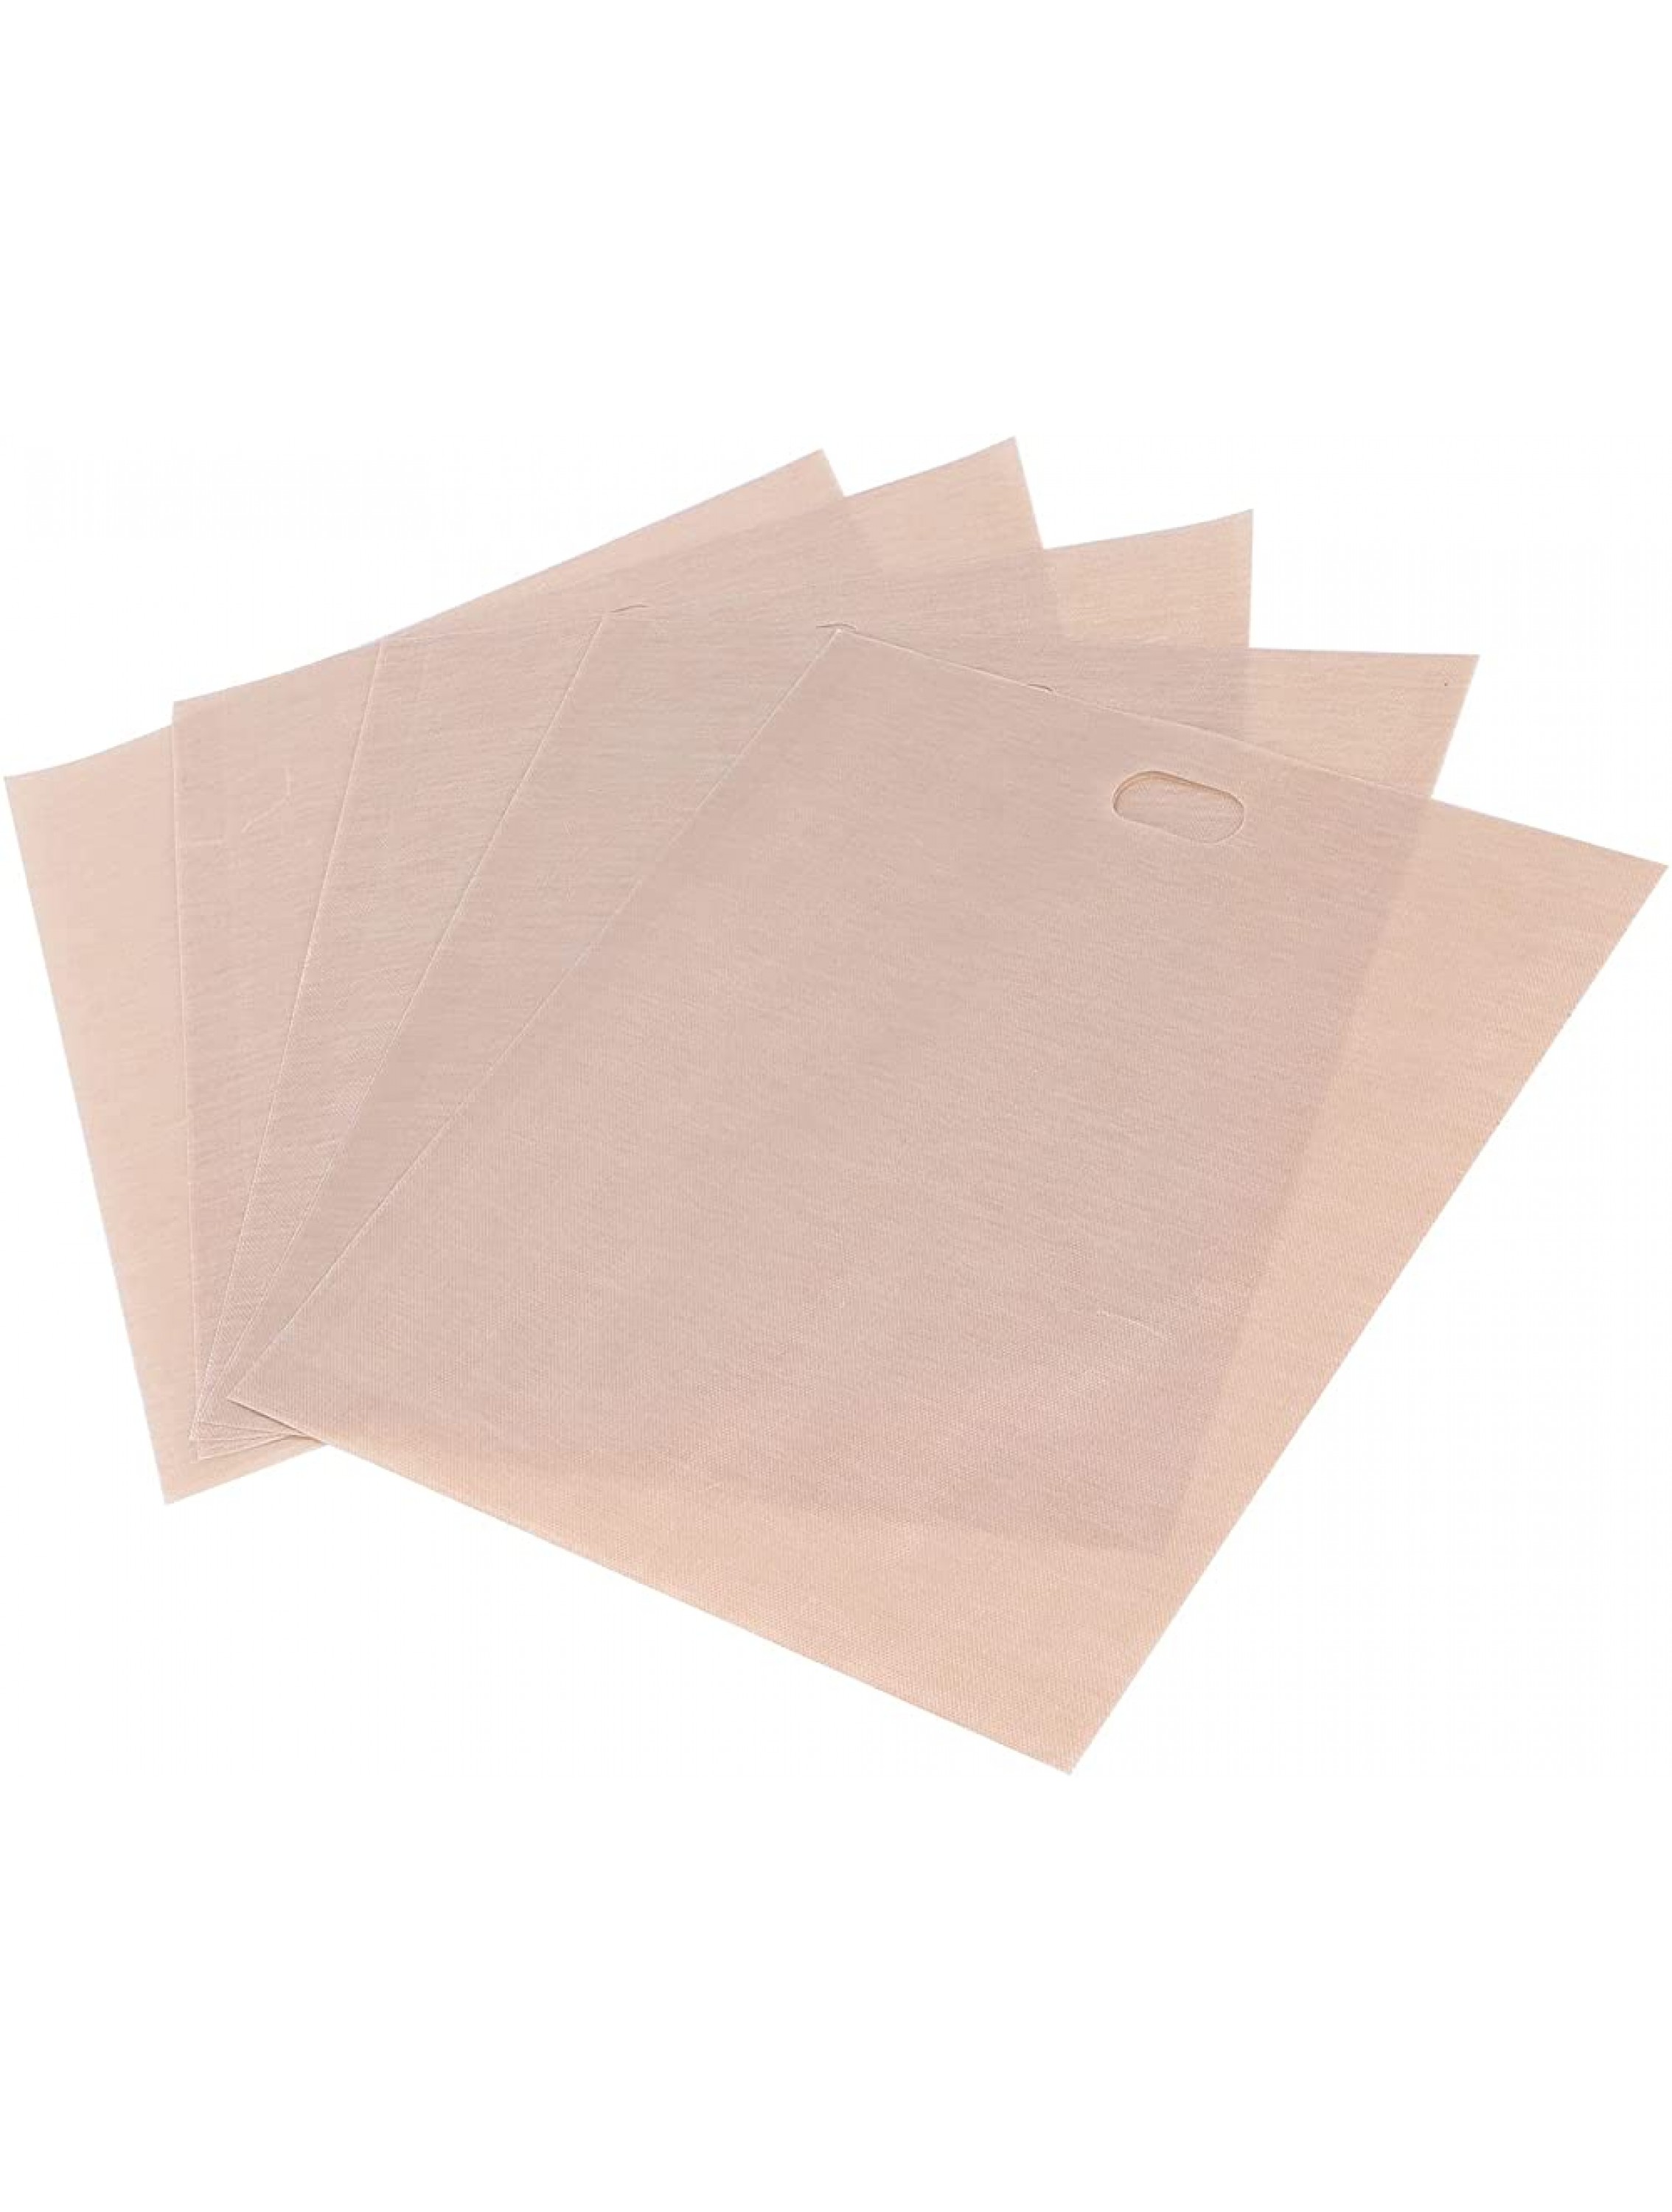 High Temperature Bags Easy To Microwave Oven Bags Non‑sticky Heat Resistance for Most People for a Toaster Microwave Oven or Grill16 * 18CM 5 packs - B73O0M779